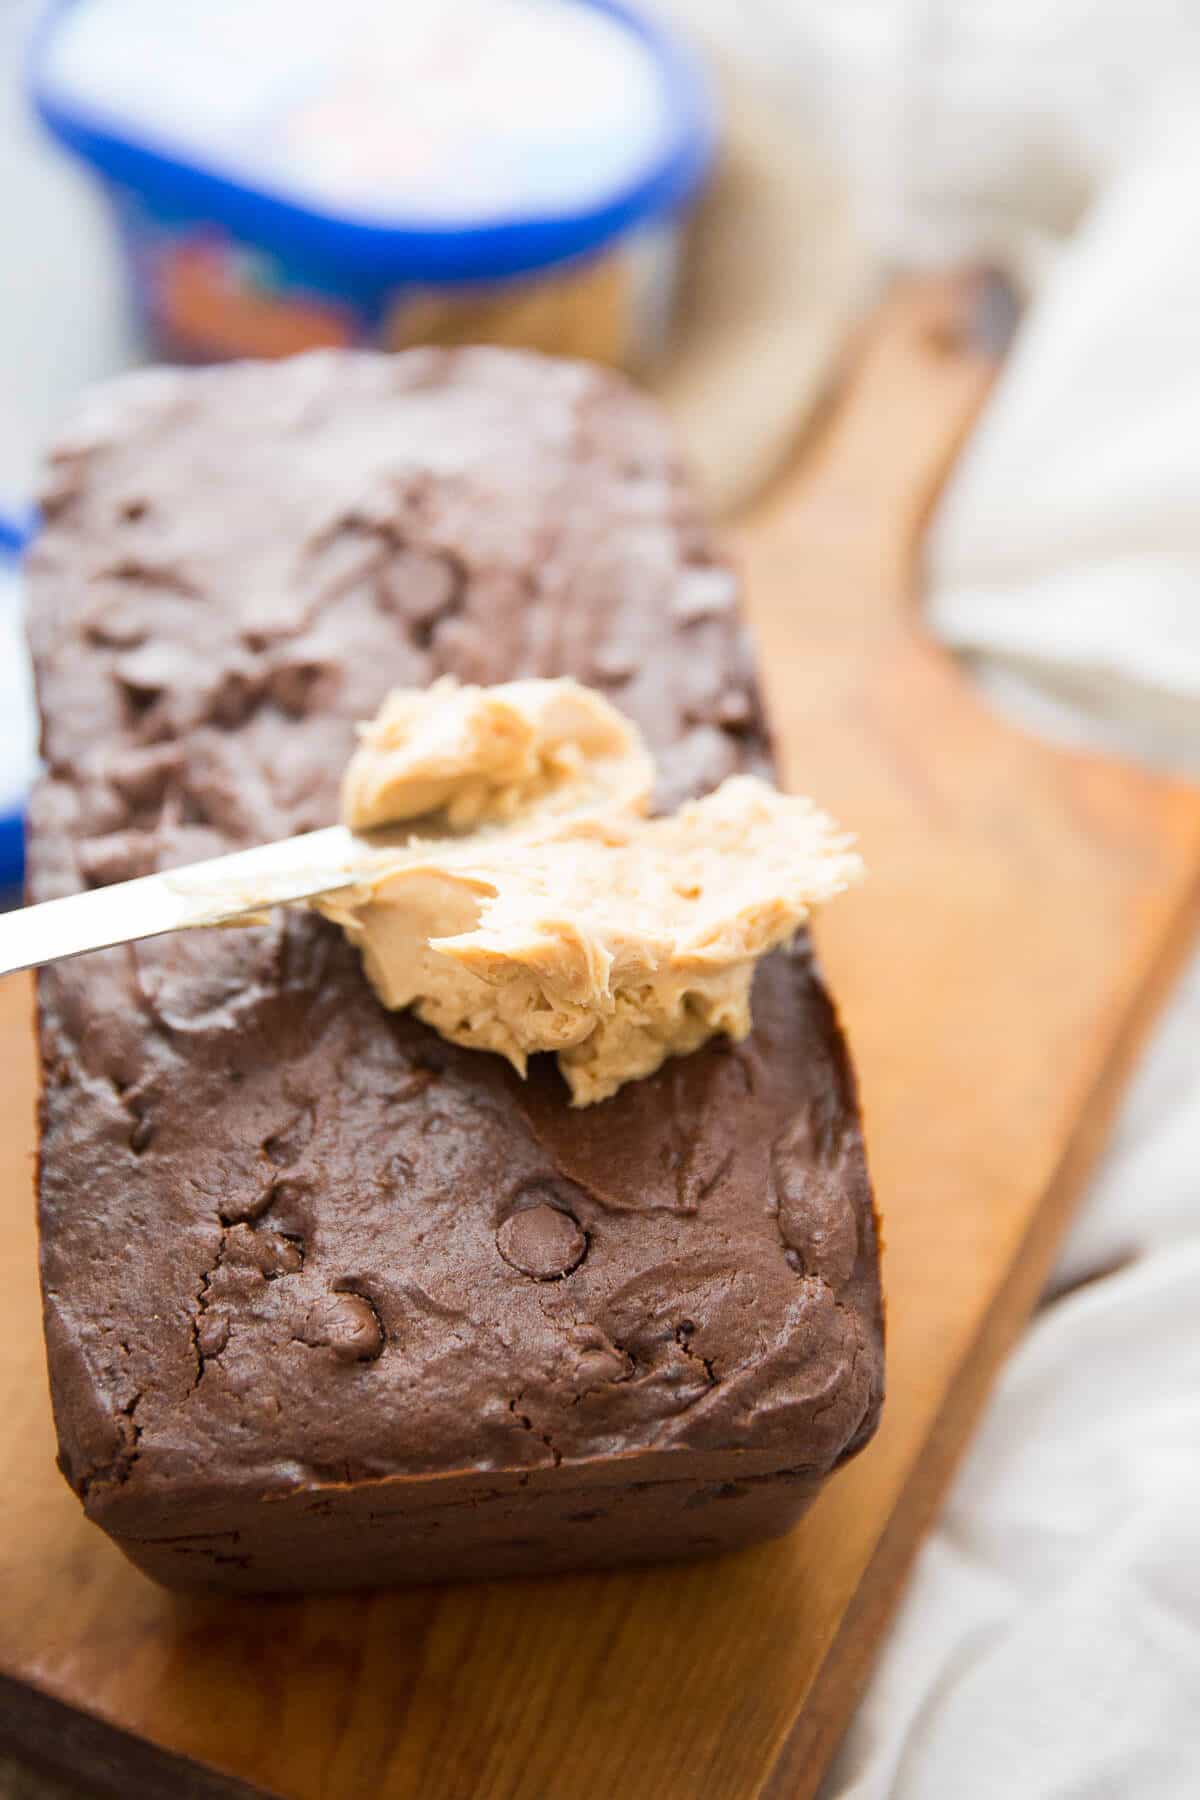 This double chocolate quick bread is decadent, moist and fudgy!  It is absolutely irresistible when topped with a creamy peanut butter frosting!